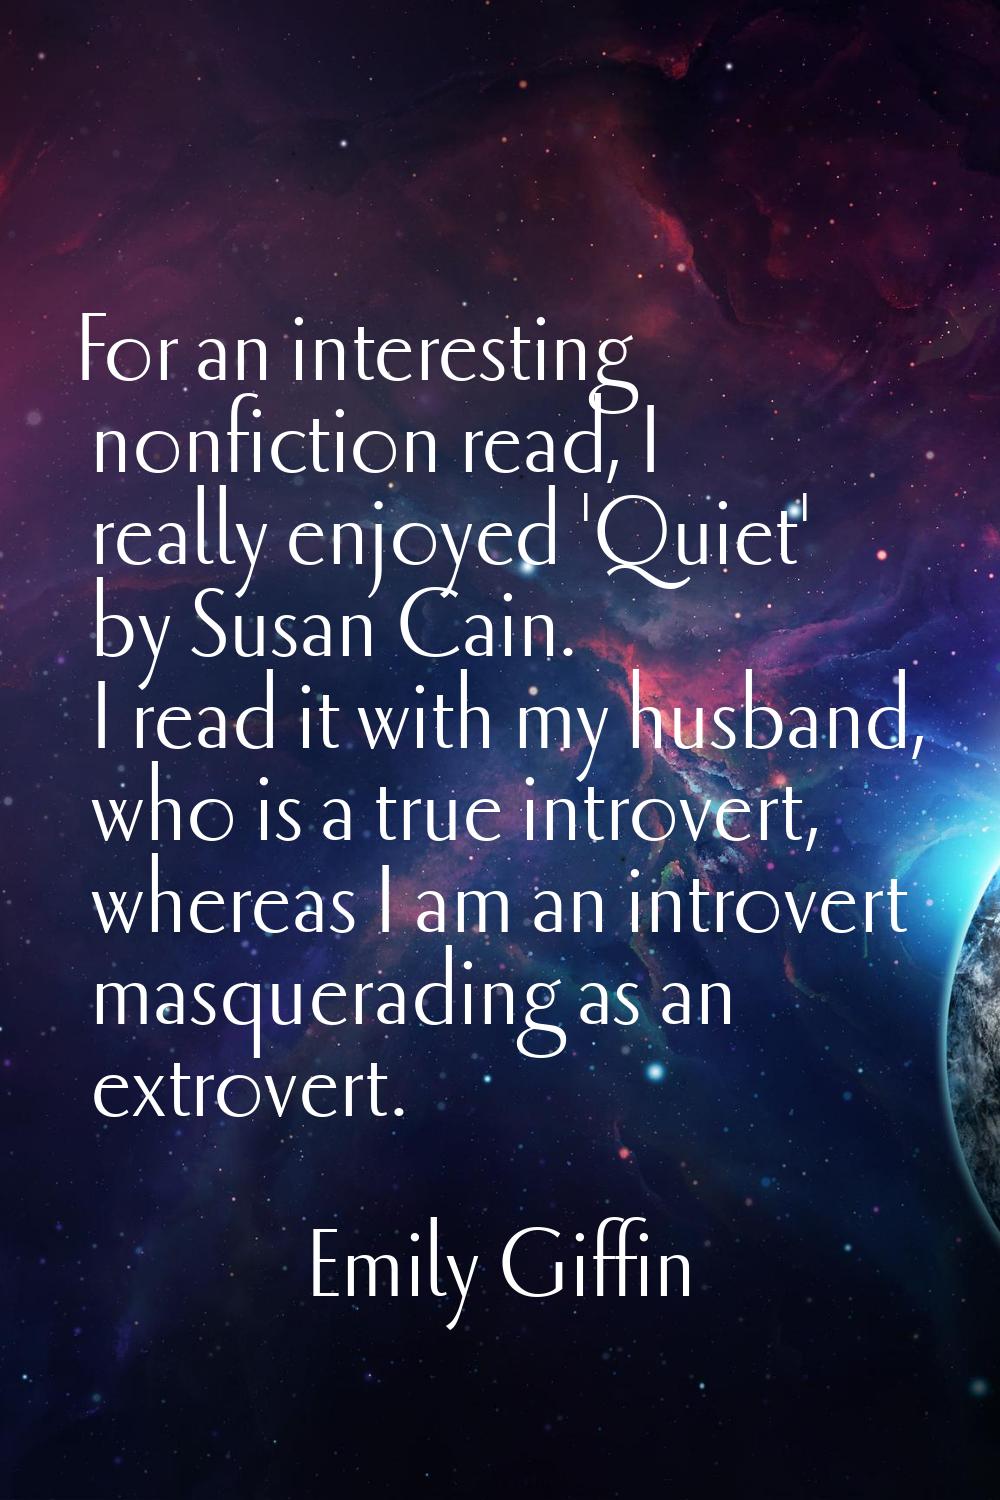 For an interesting nonfiction read, I really enjoyed 'Quiet' by Susan Cain. I read it with my husba